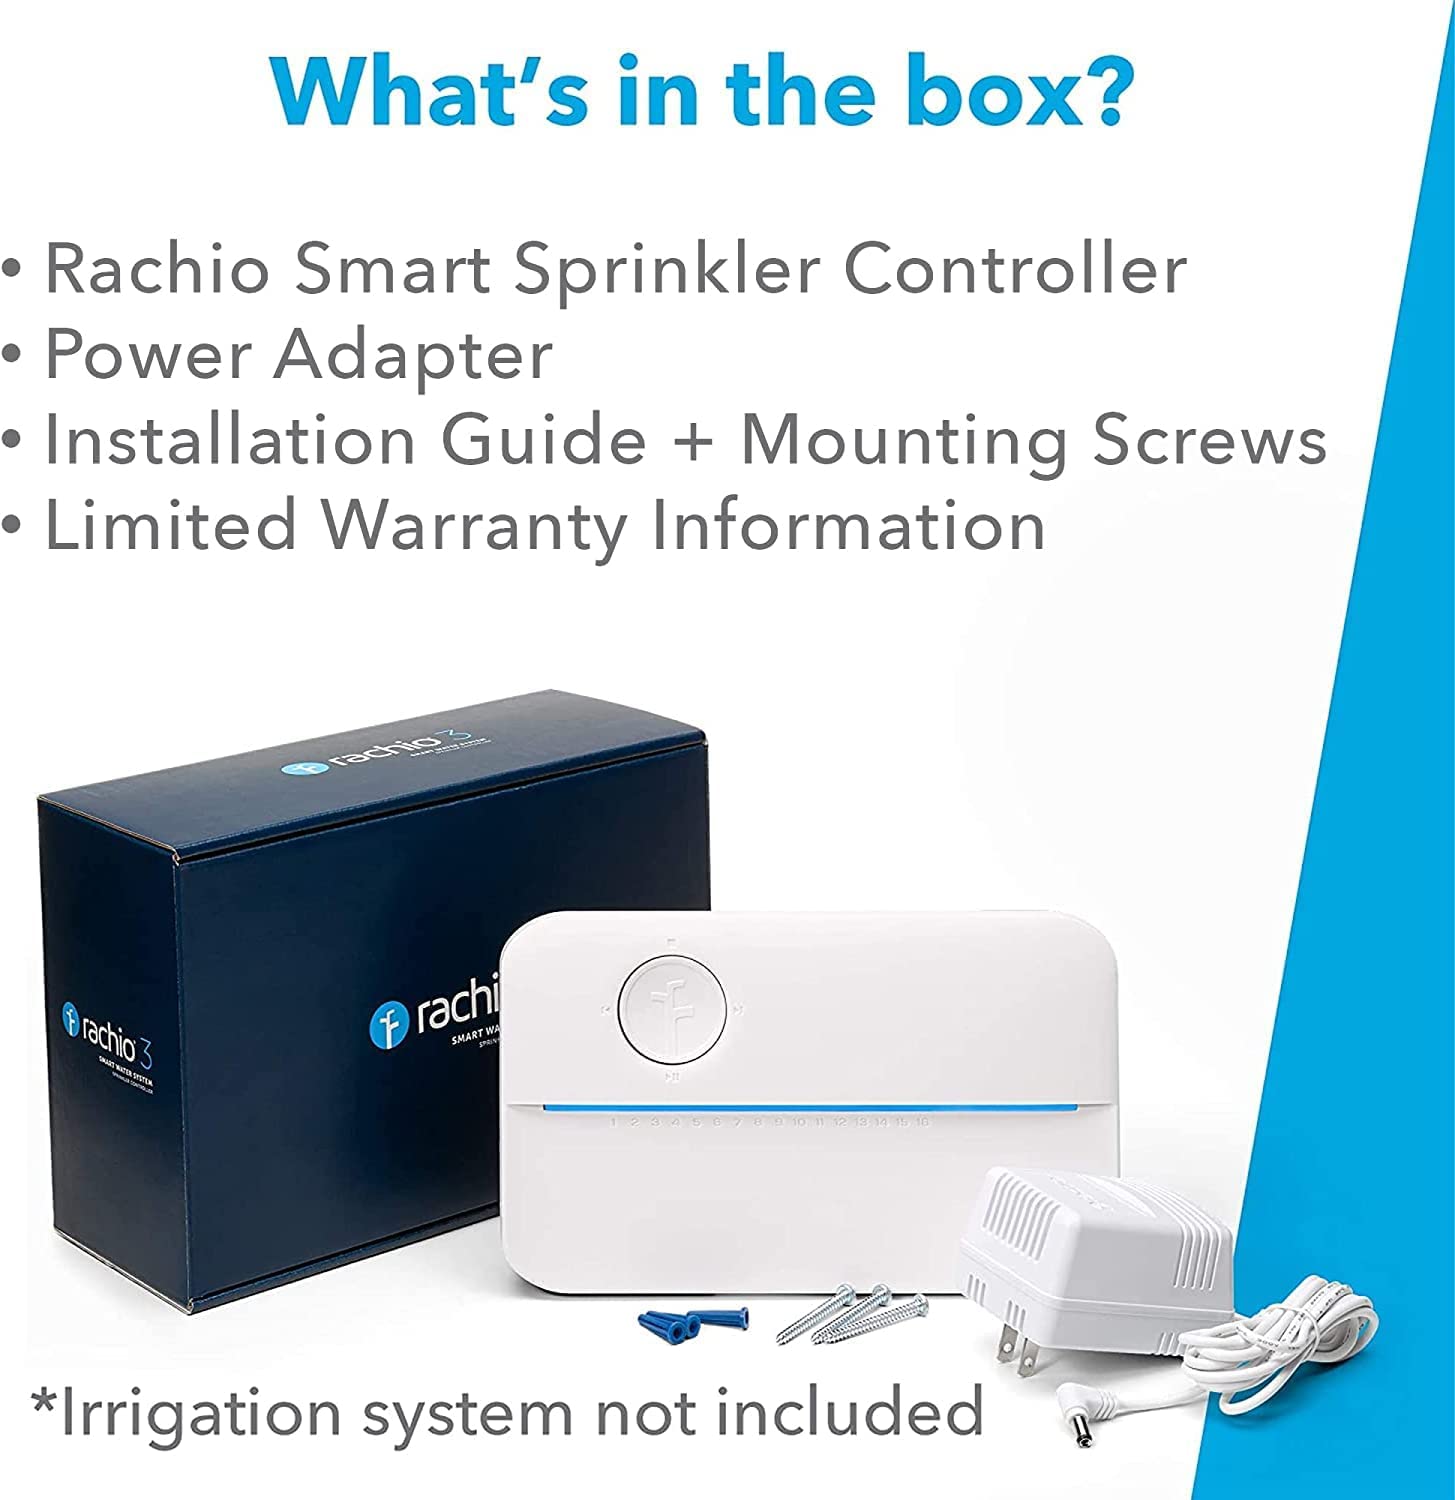 Rachio 3: 8 Zone Smart Sprinkler Controller (Simple Automated Scheduling + Local Weather Intelligence. Save Water w/ Rain, Freeze & Wind Skip), App Enabled, Works w/ Alexa, Fast & Easy Install...